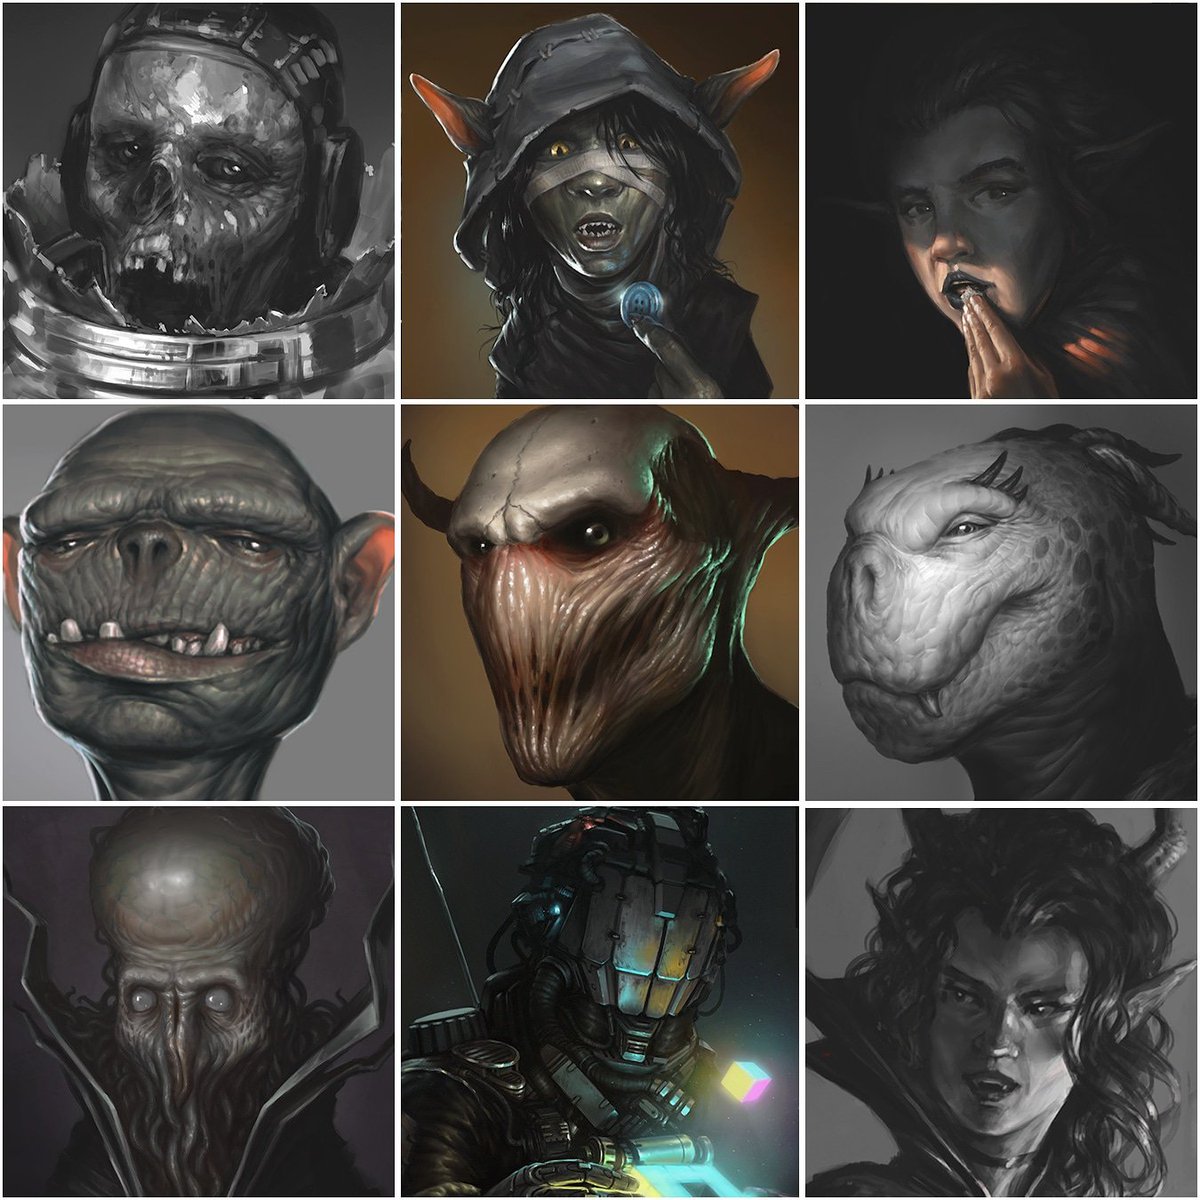 I do make a lot of faces and here's a small collection for the #faceyourart. Have a favorite? 
#illustration #illustratorslife #facedrawing #artgrind #digitalartistry #conceptart #painting #fantasy #fantasyartist #dndart #criticalrole #criticalrolefanart #faceyourartchallenge